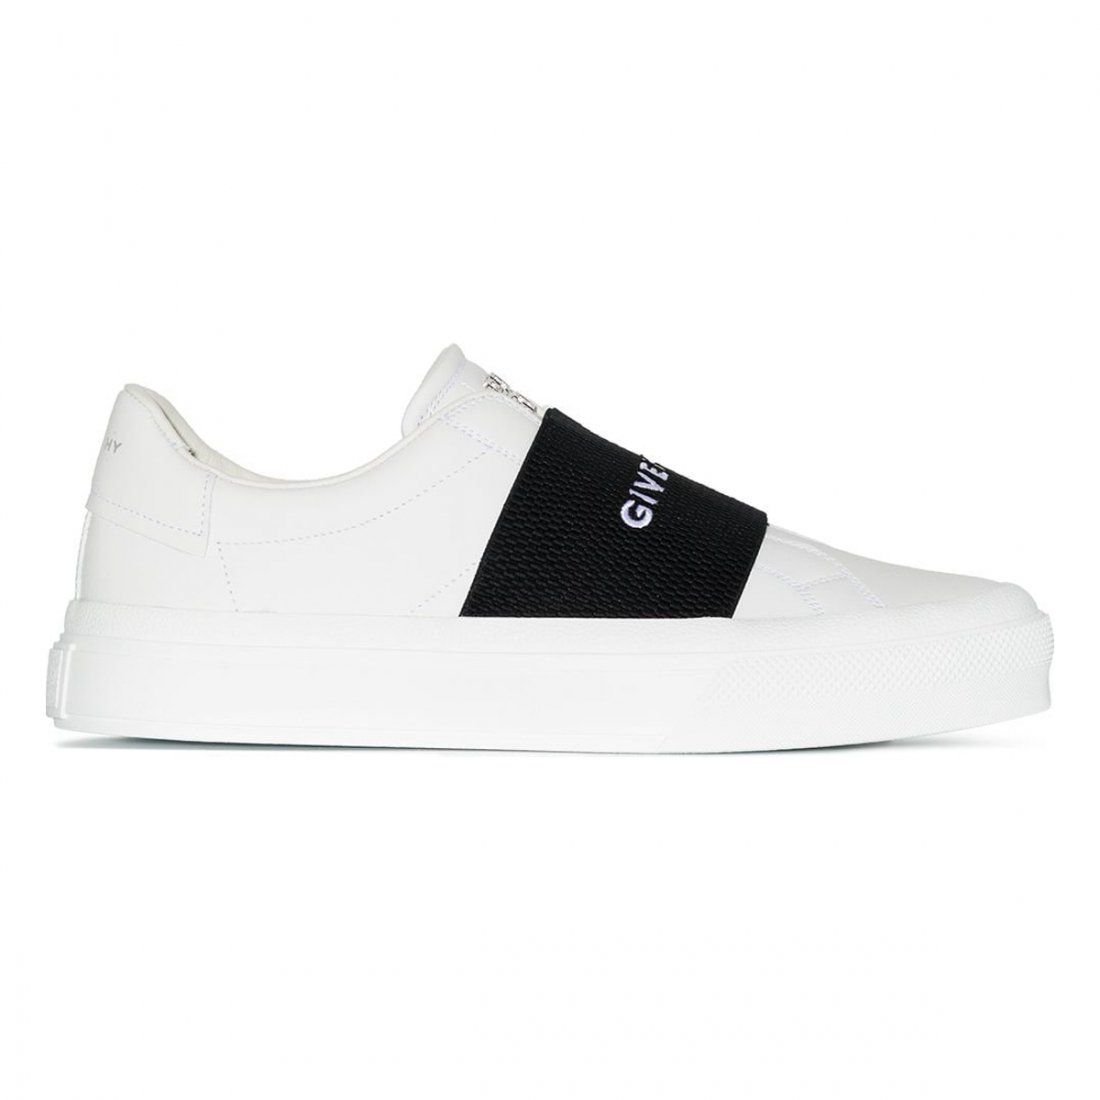 Givenchy - Slip-on Sneakers 'City Sport' pour Femmes